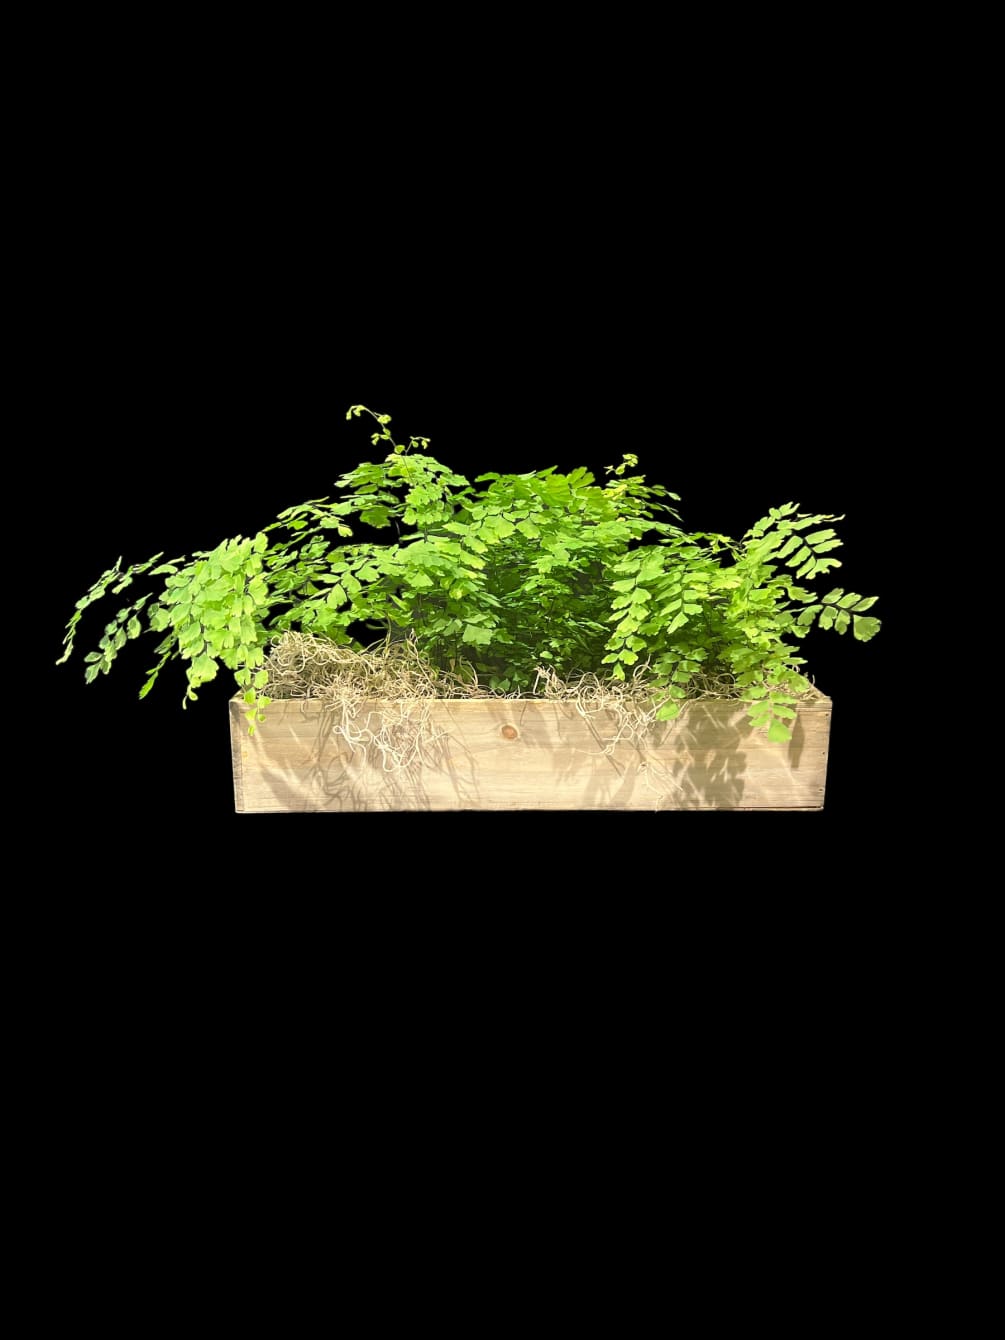 Fern Gully, a long narrow box filled with a variety of ferns